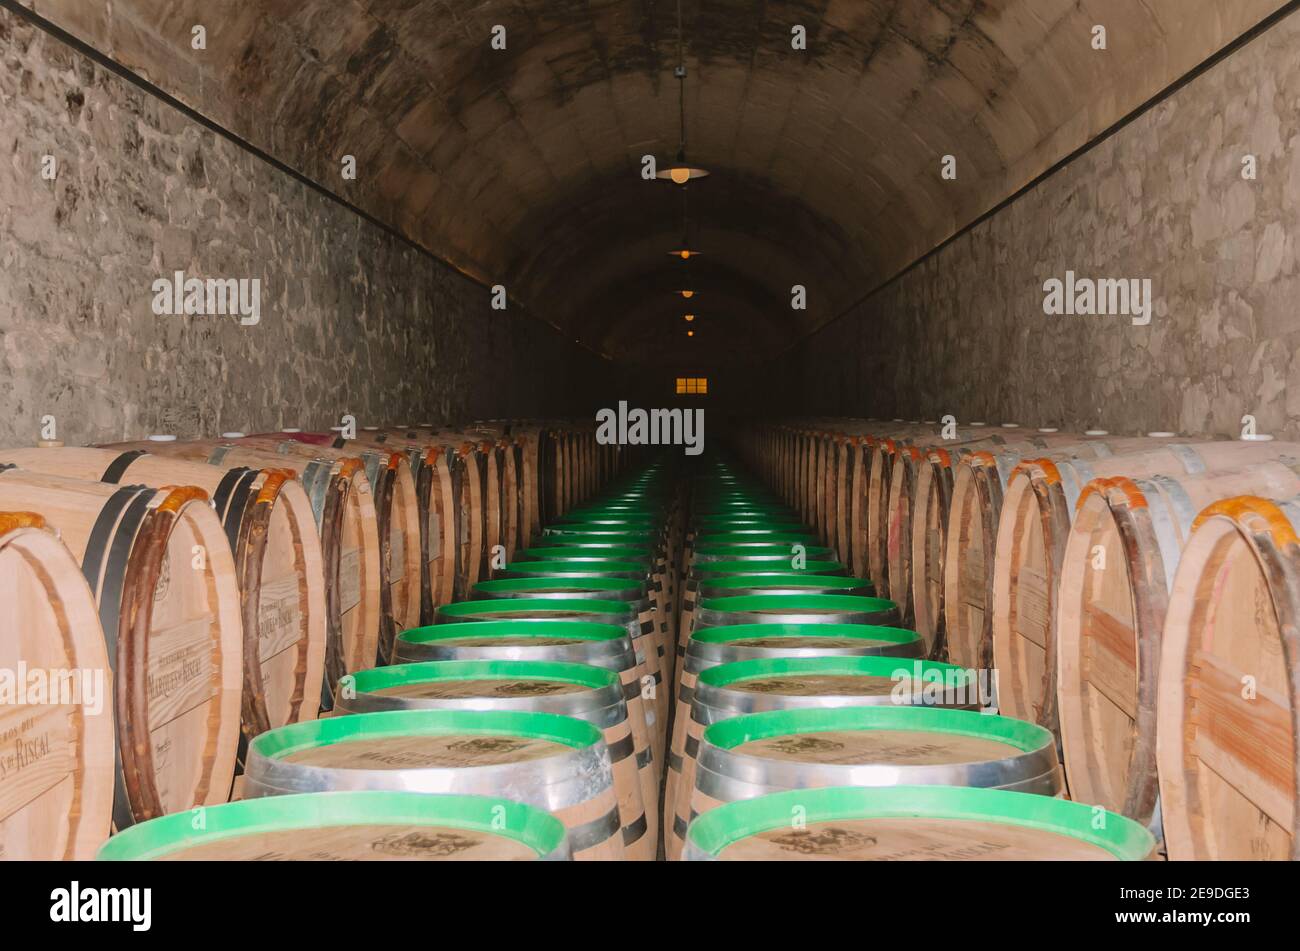 EL CIEGO, ÁLAVA, SPAIN - Jan 30, 2021: The picture shows some wine barrels lined up from the Marques de Riscal Winery Stock Photo